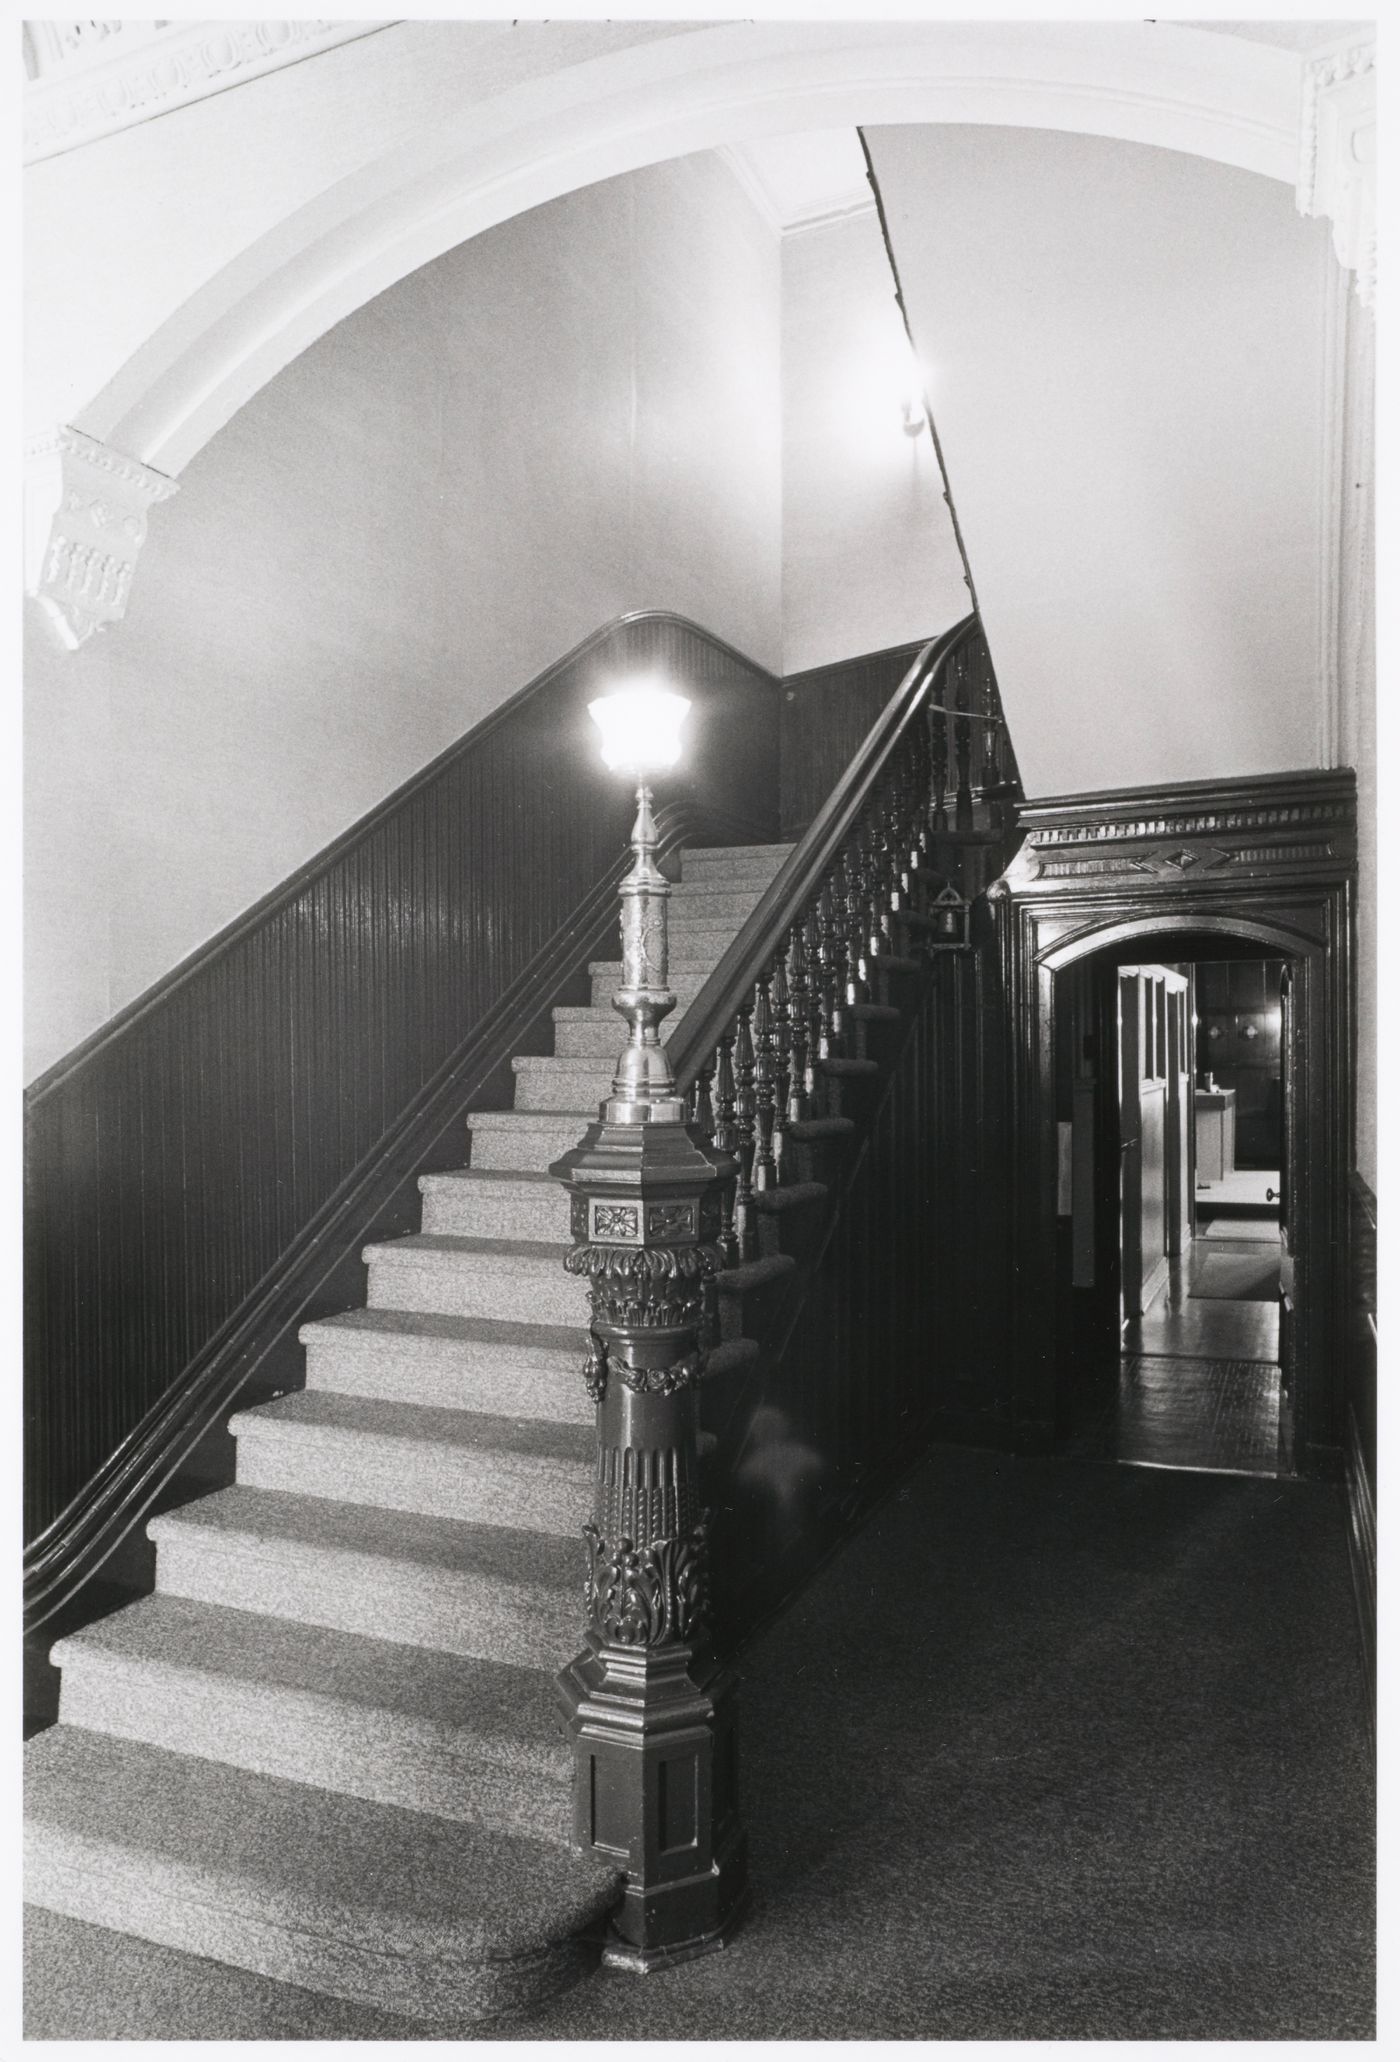 Interior view of the original carved wooden stairs in the east part of Shaughnessy House, Montréal, Québec